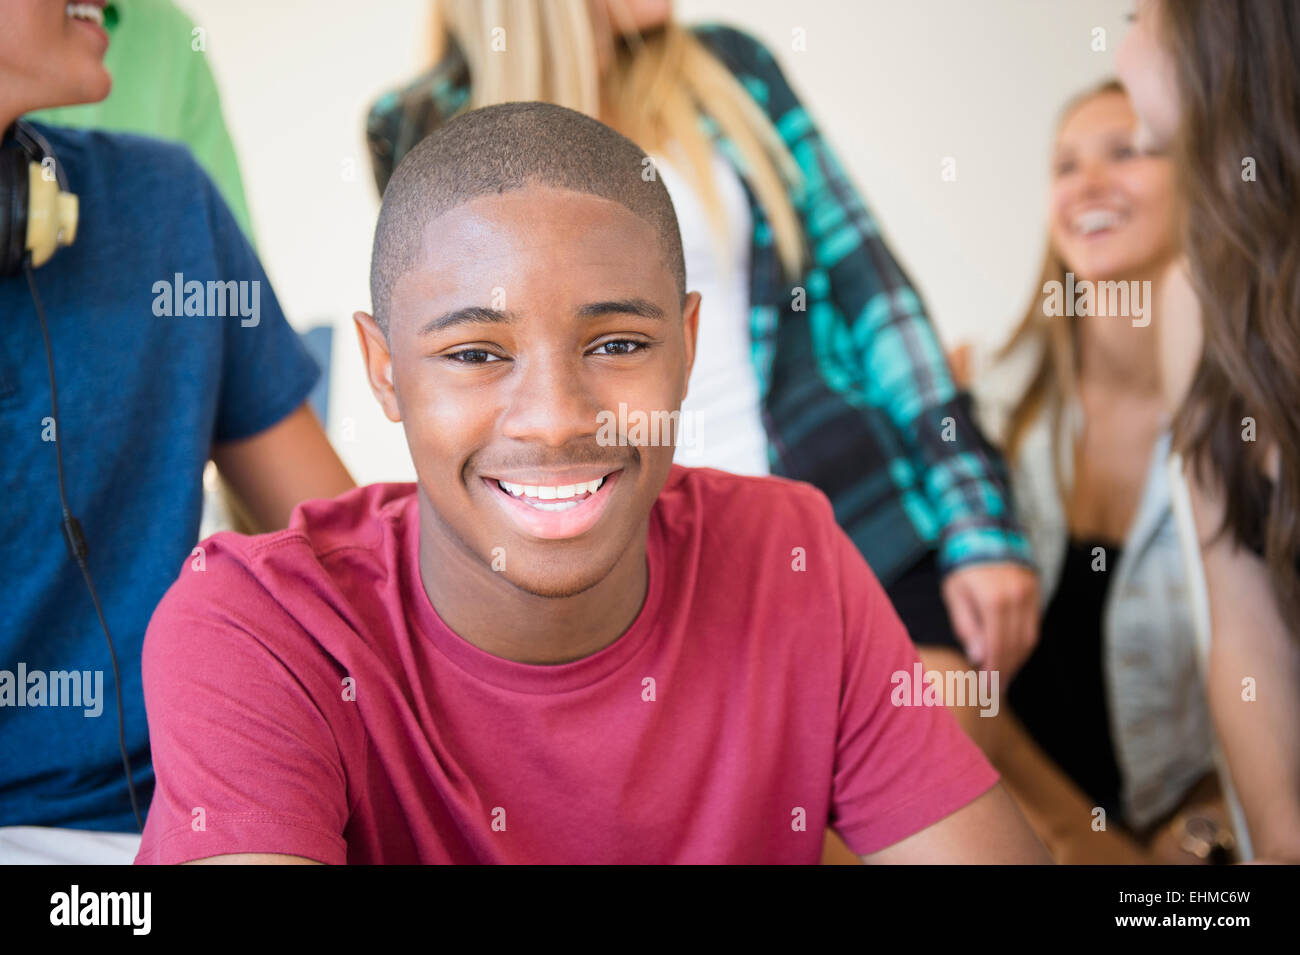 Teenager smiling at party Banque D'Images